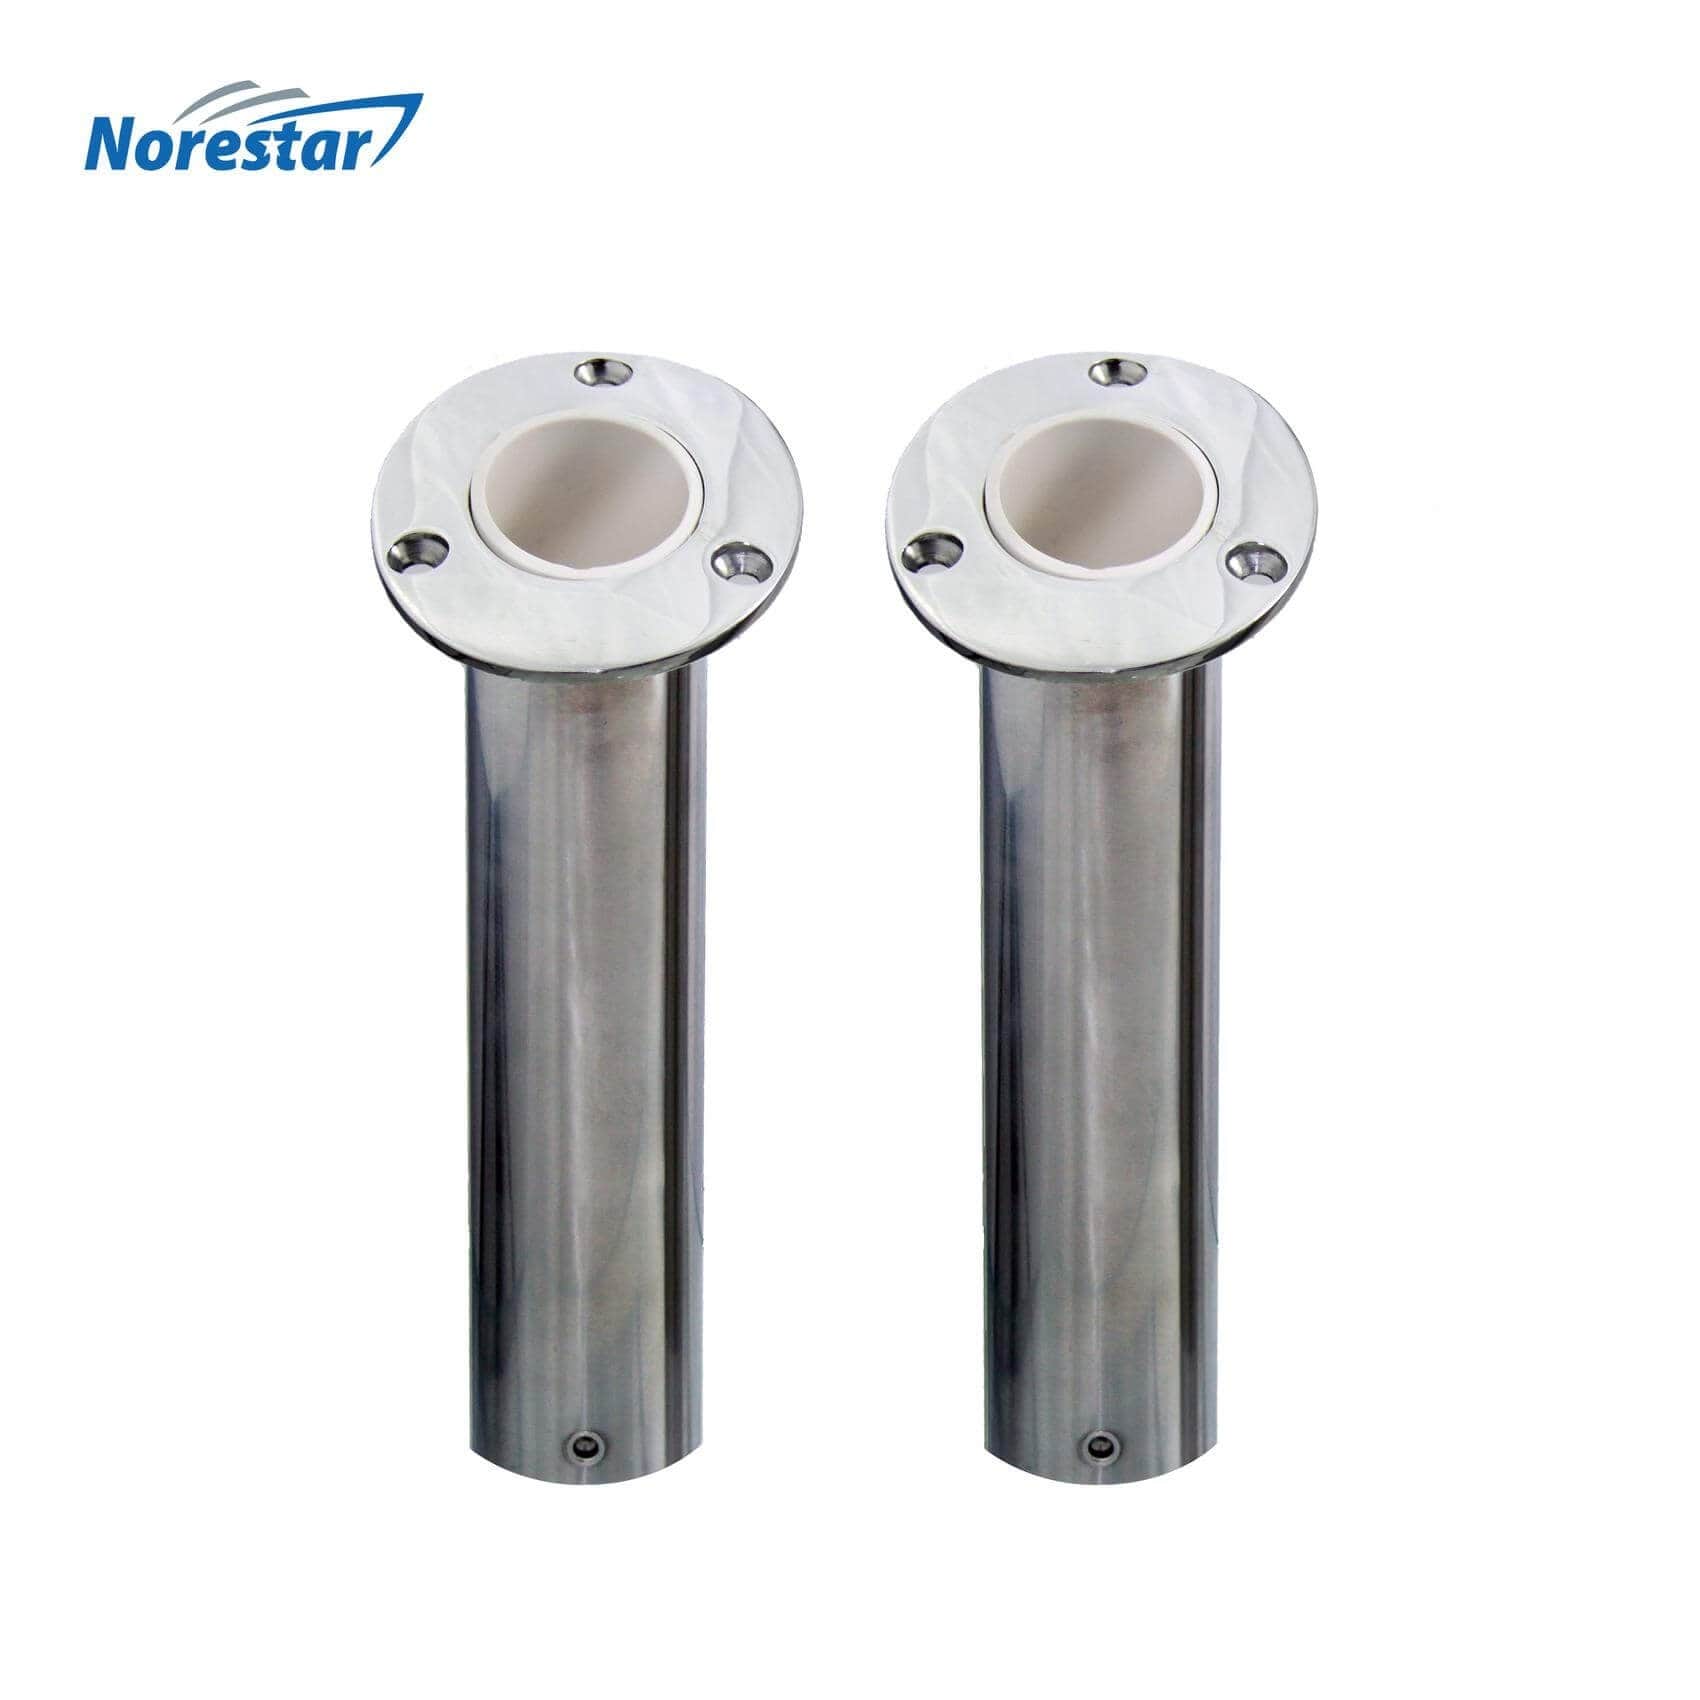 2X Fishing Rod Holders for Boats Stainless Steel Rod Holder